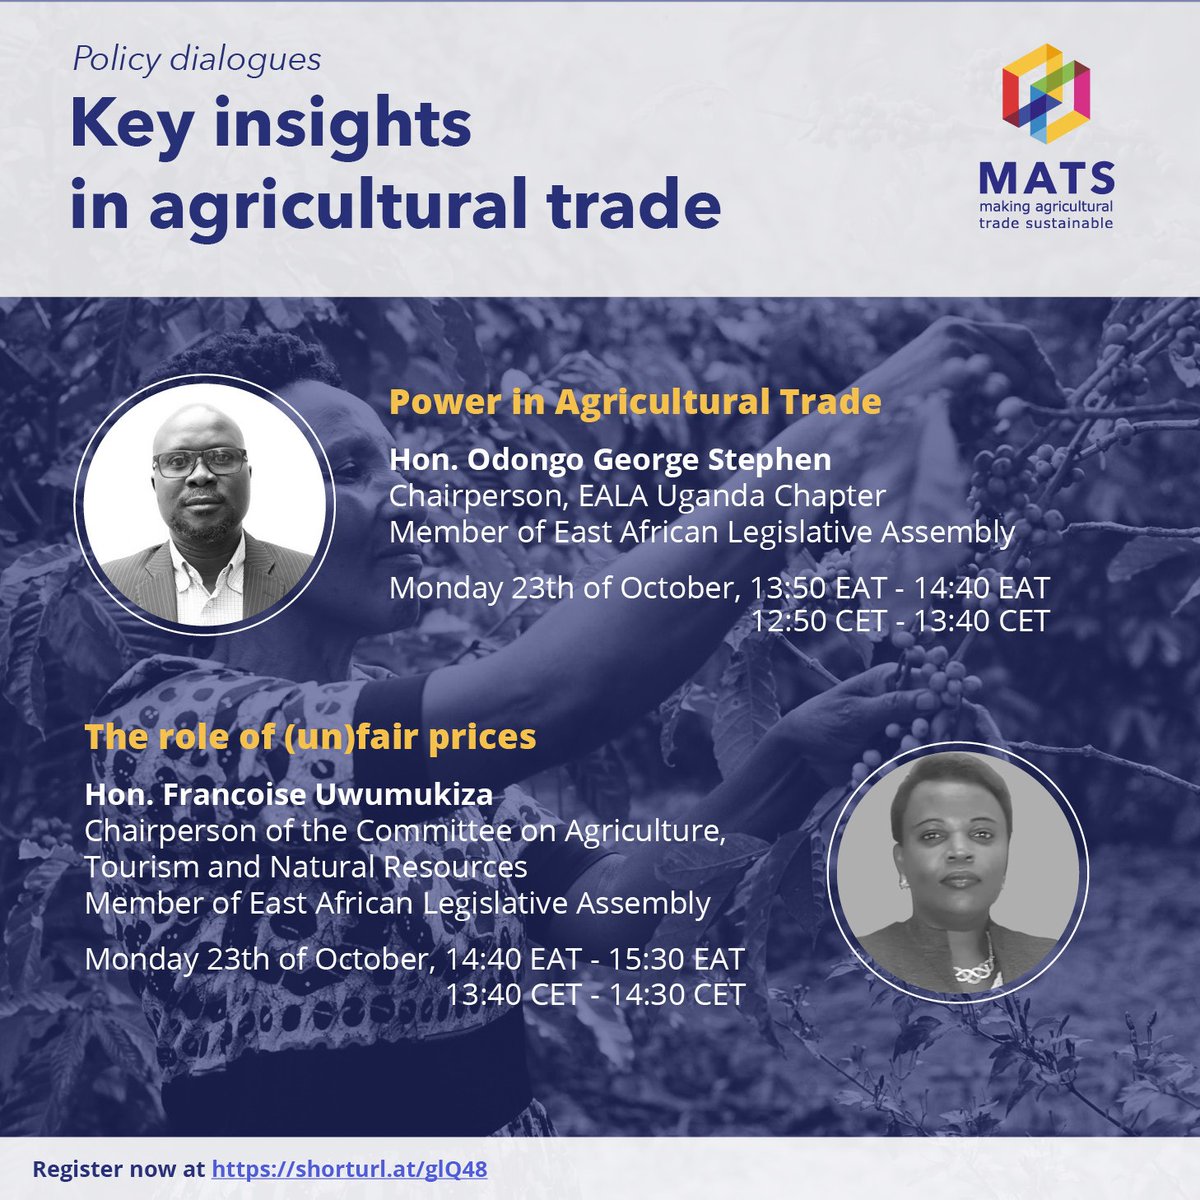 💬 Join our four expert speakers to discuss challenges in agricultural trade 🏠Where: Virtually and in person Moshi, Tanzania 📆 When: 23th and 24th of October 👉 Ensure your spot at shorturl.at/glQ48 @MATS_H2020